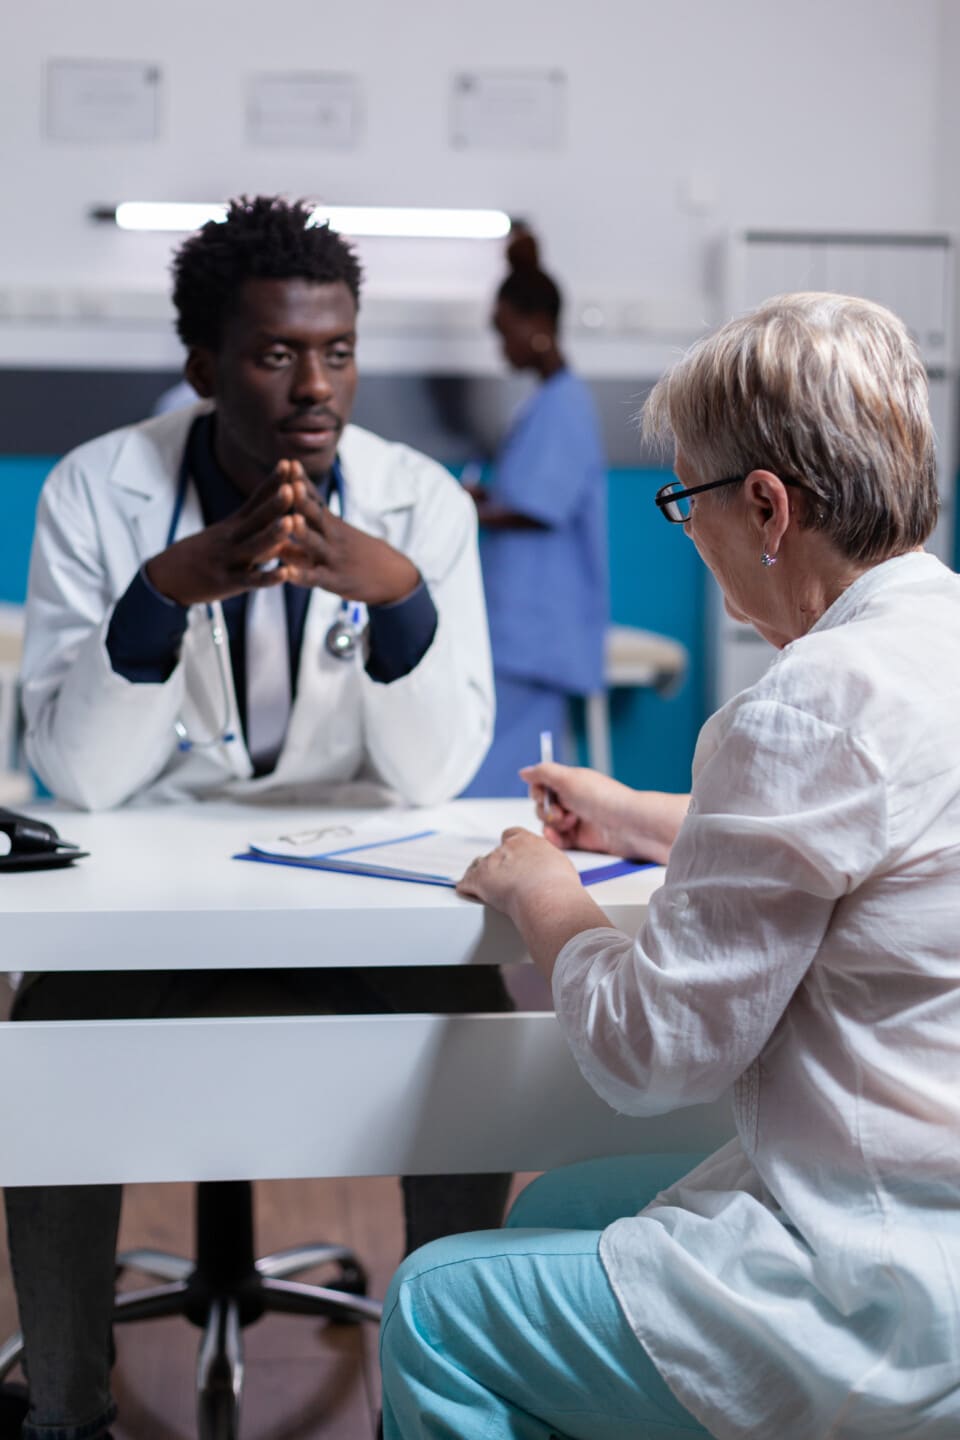 Doctor of african ethnicity consulting elderly patient sitting at white desk in office workplace. Black man with uniform and old woman discussing healthcare treatment and medicine